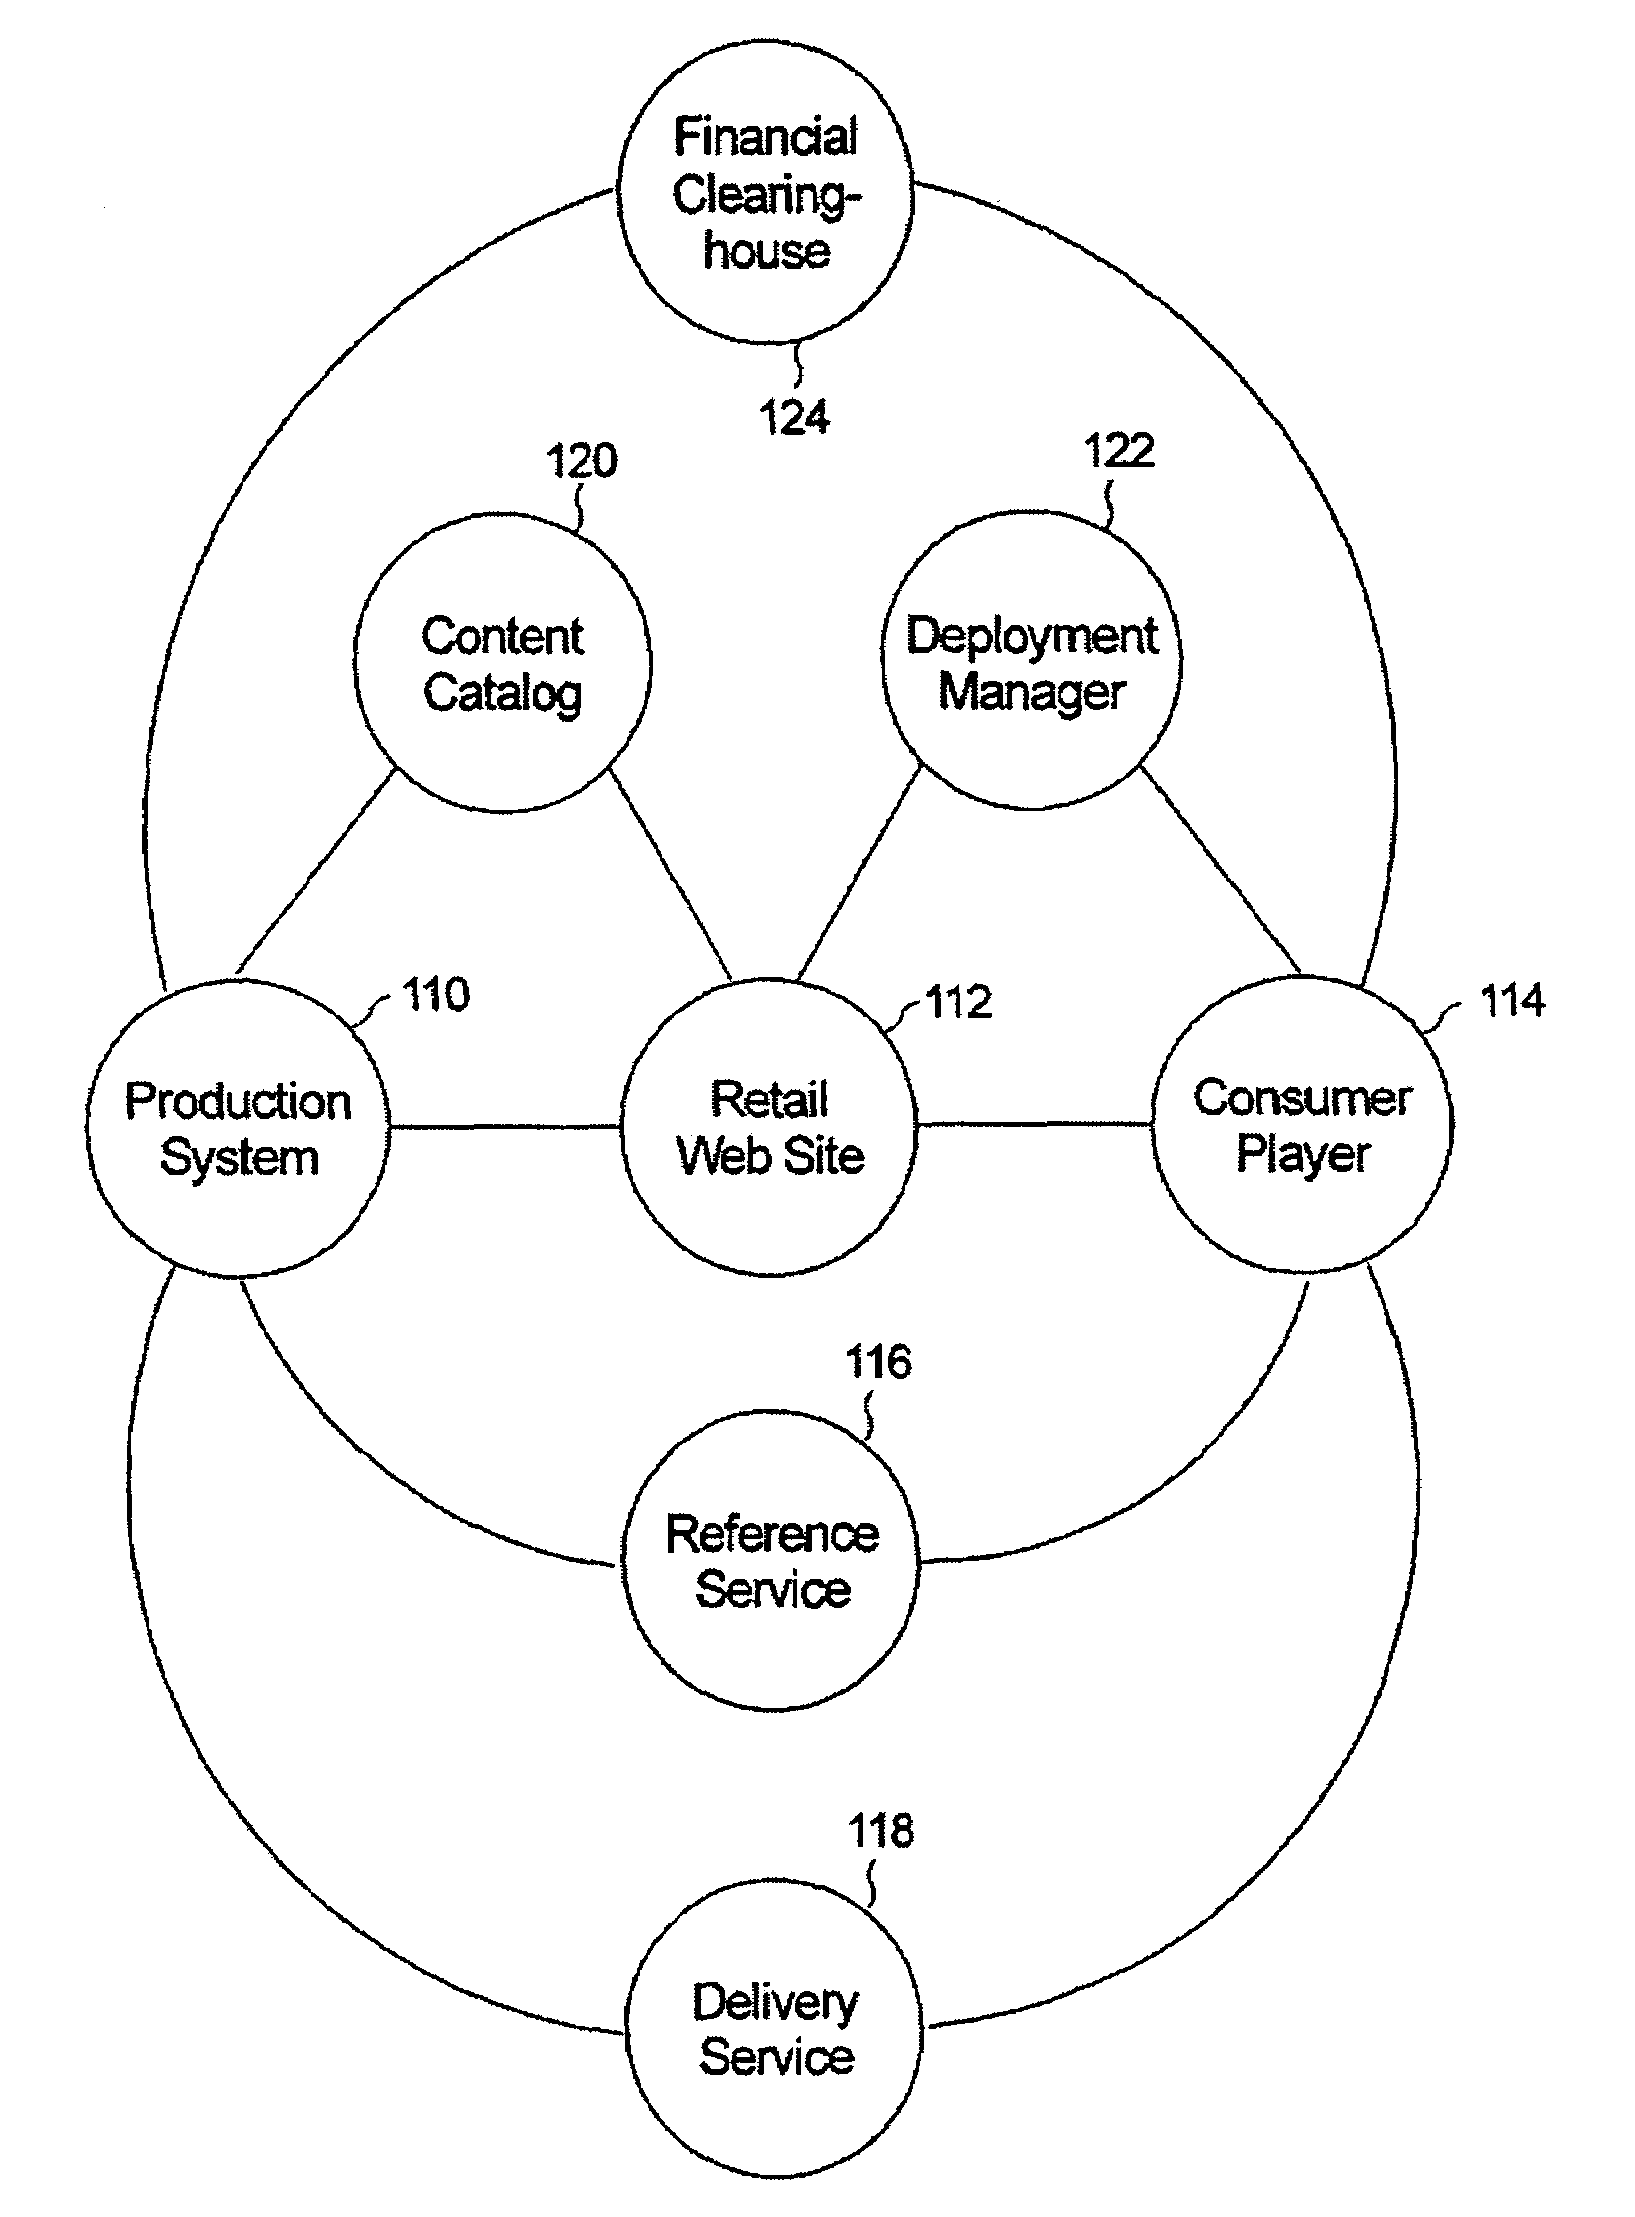 Electronic music/media distribution system